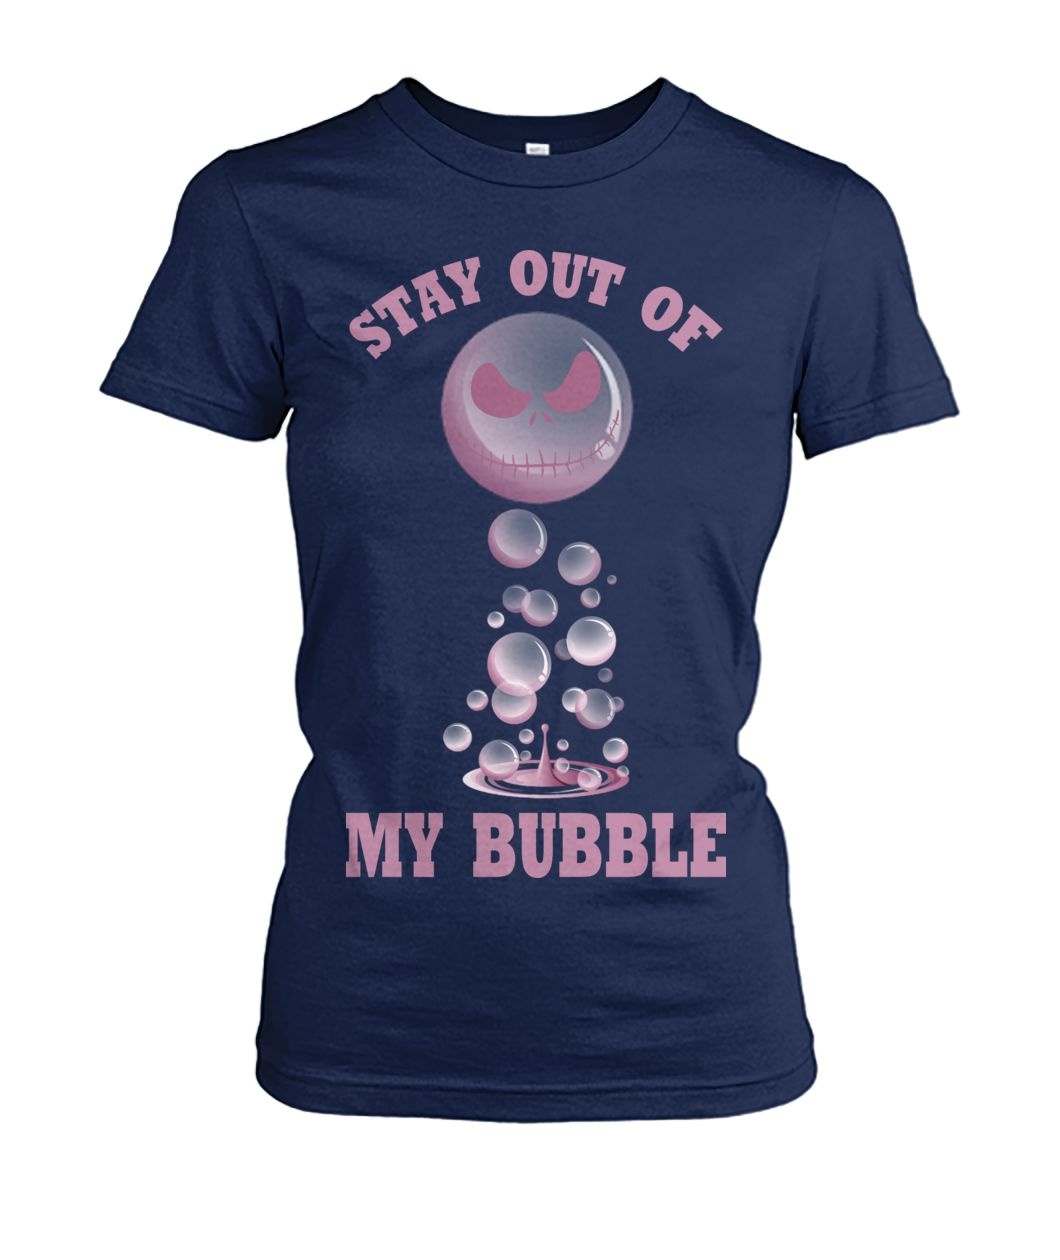 Devil Bubble - Stay out of my bubble